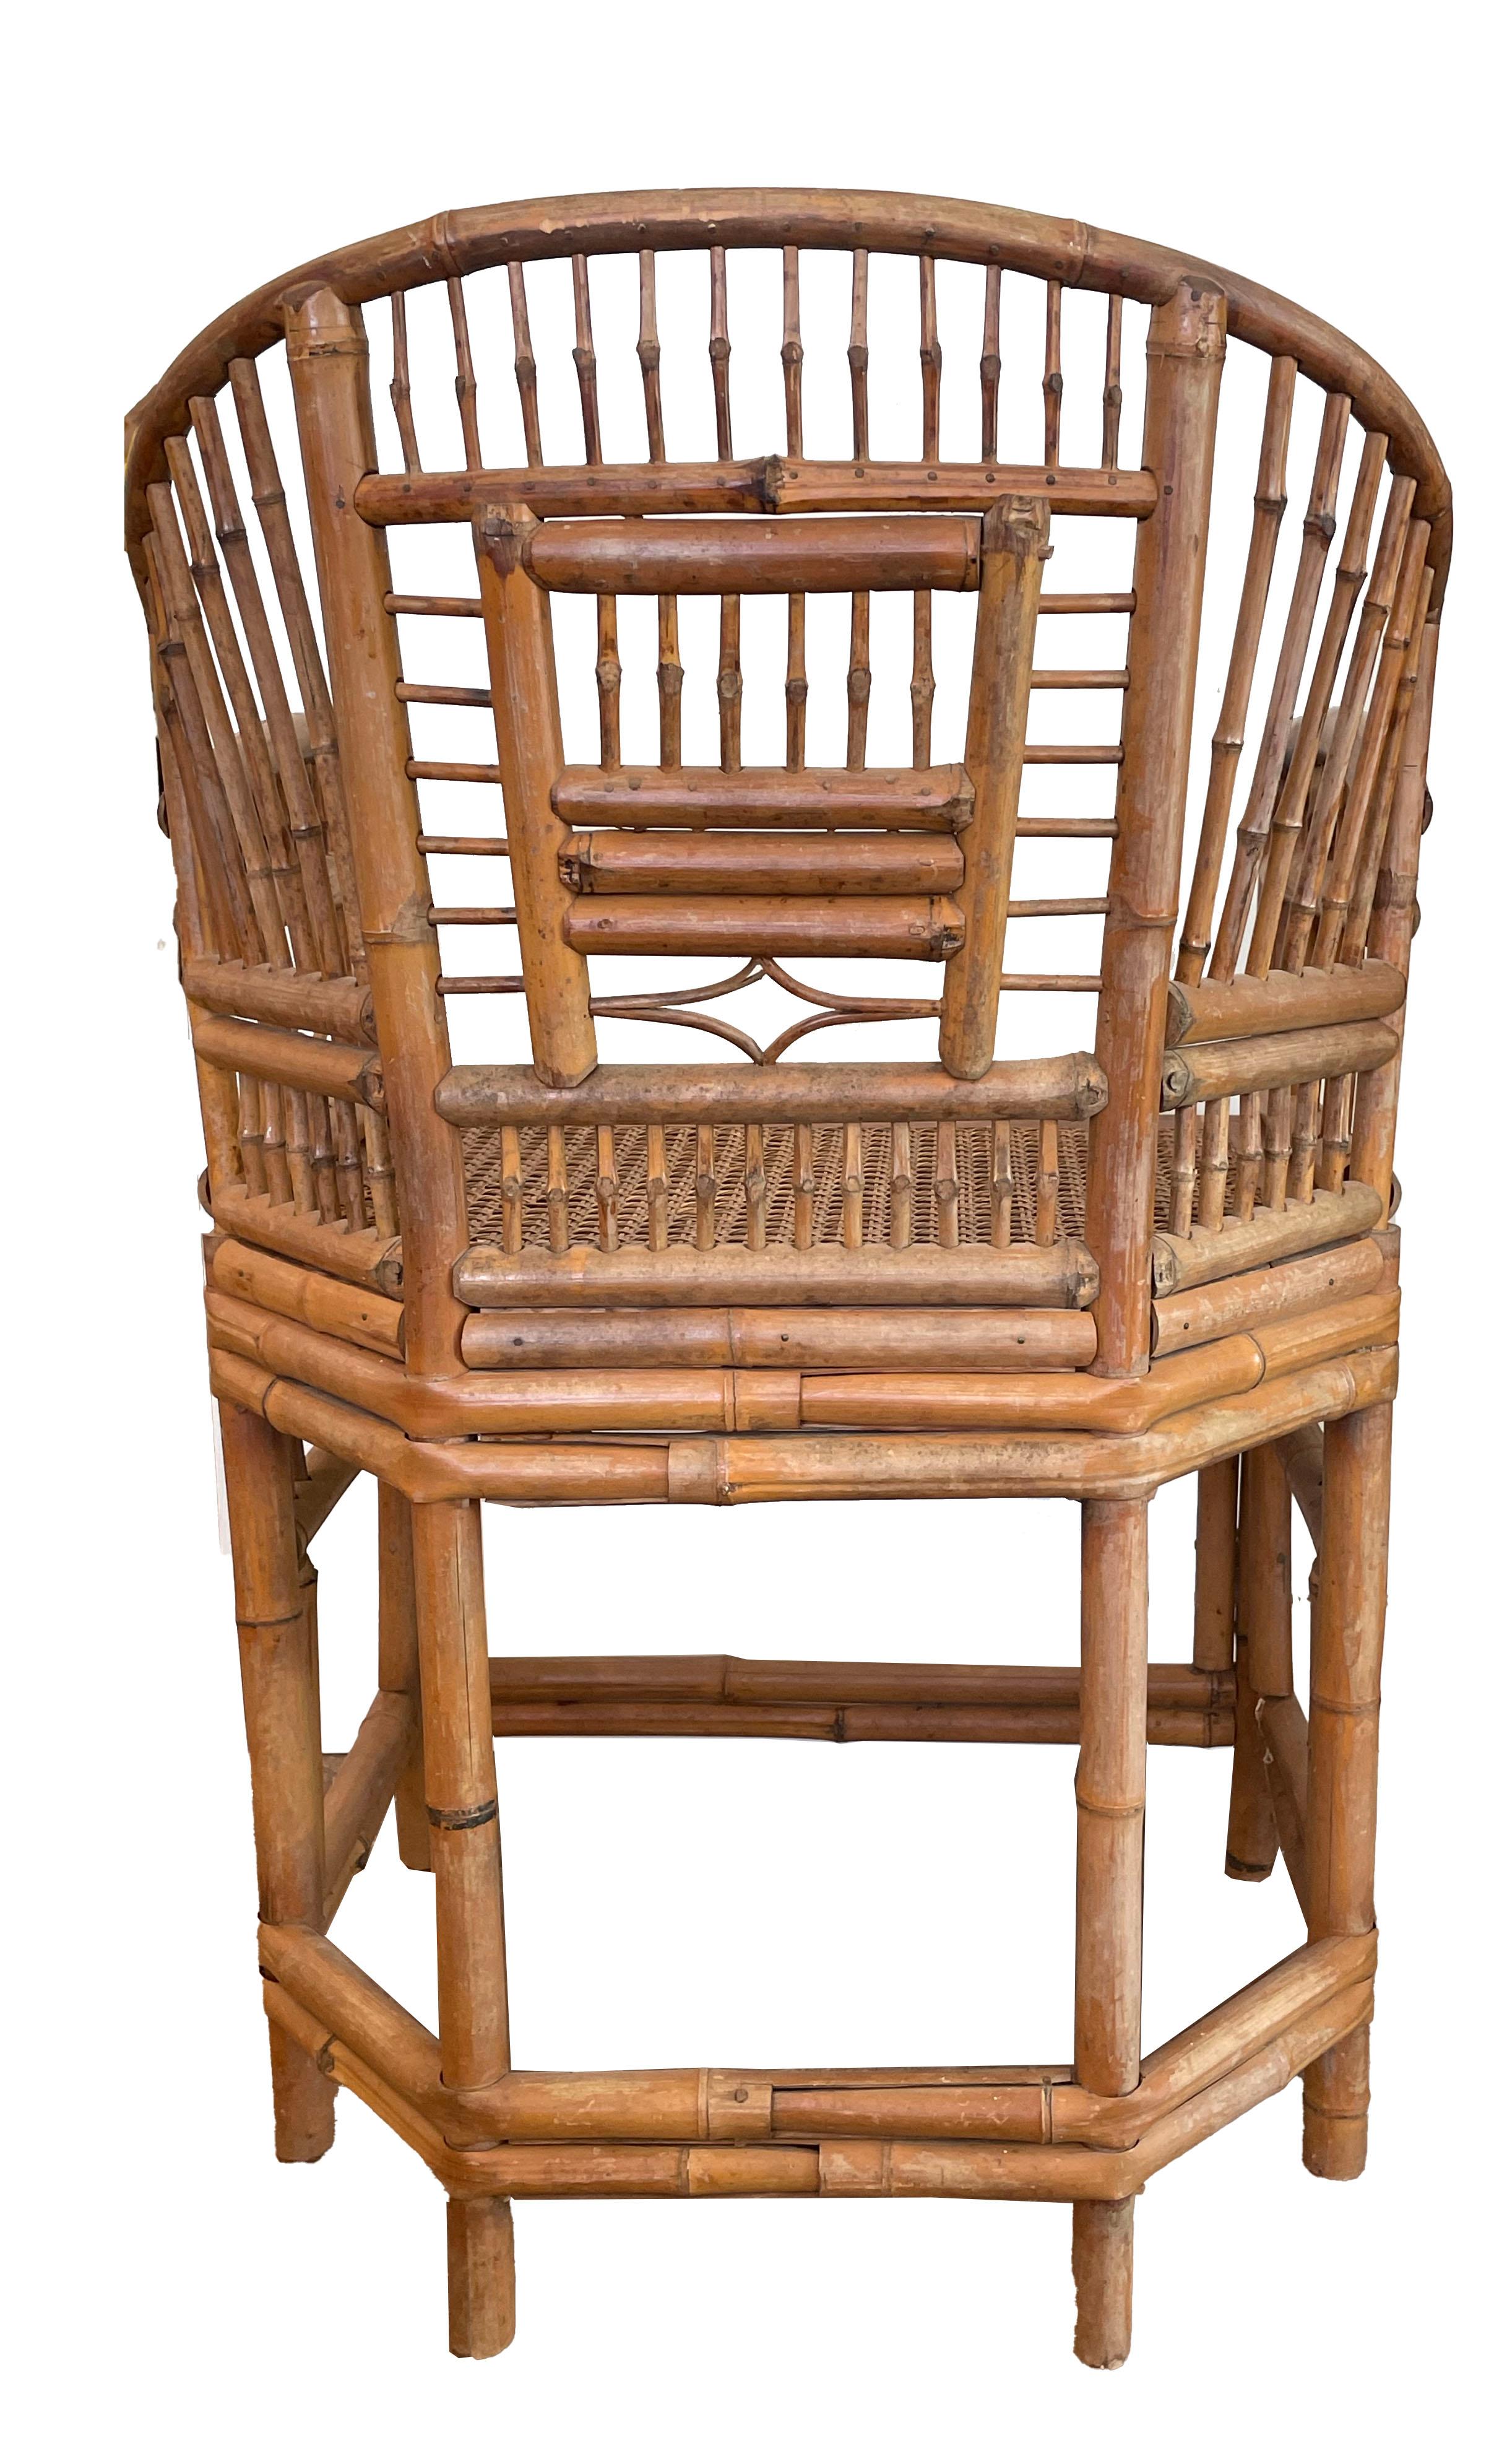 A lovely pair of spindle style bamboo export armchairs with slightly rounded back. good condition.

These chairs show stylistic influences of Chinese Export bamboo furniture made at the beginning of the 19th century for the great chinoiserie rooms